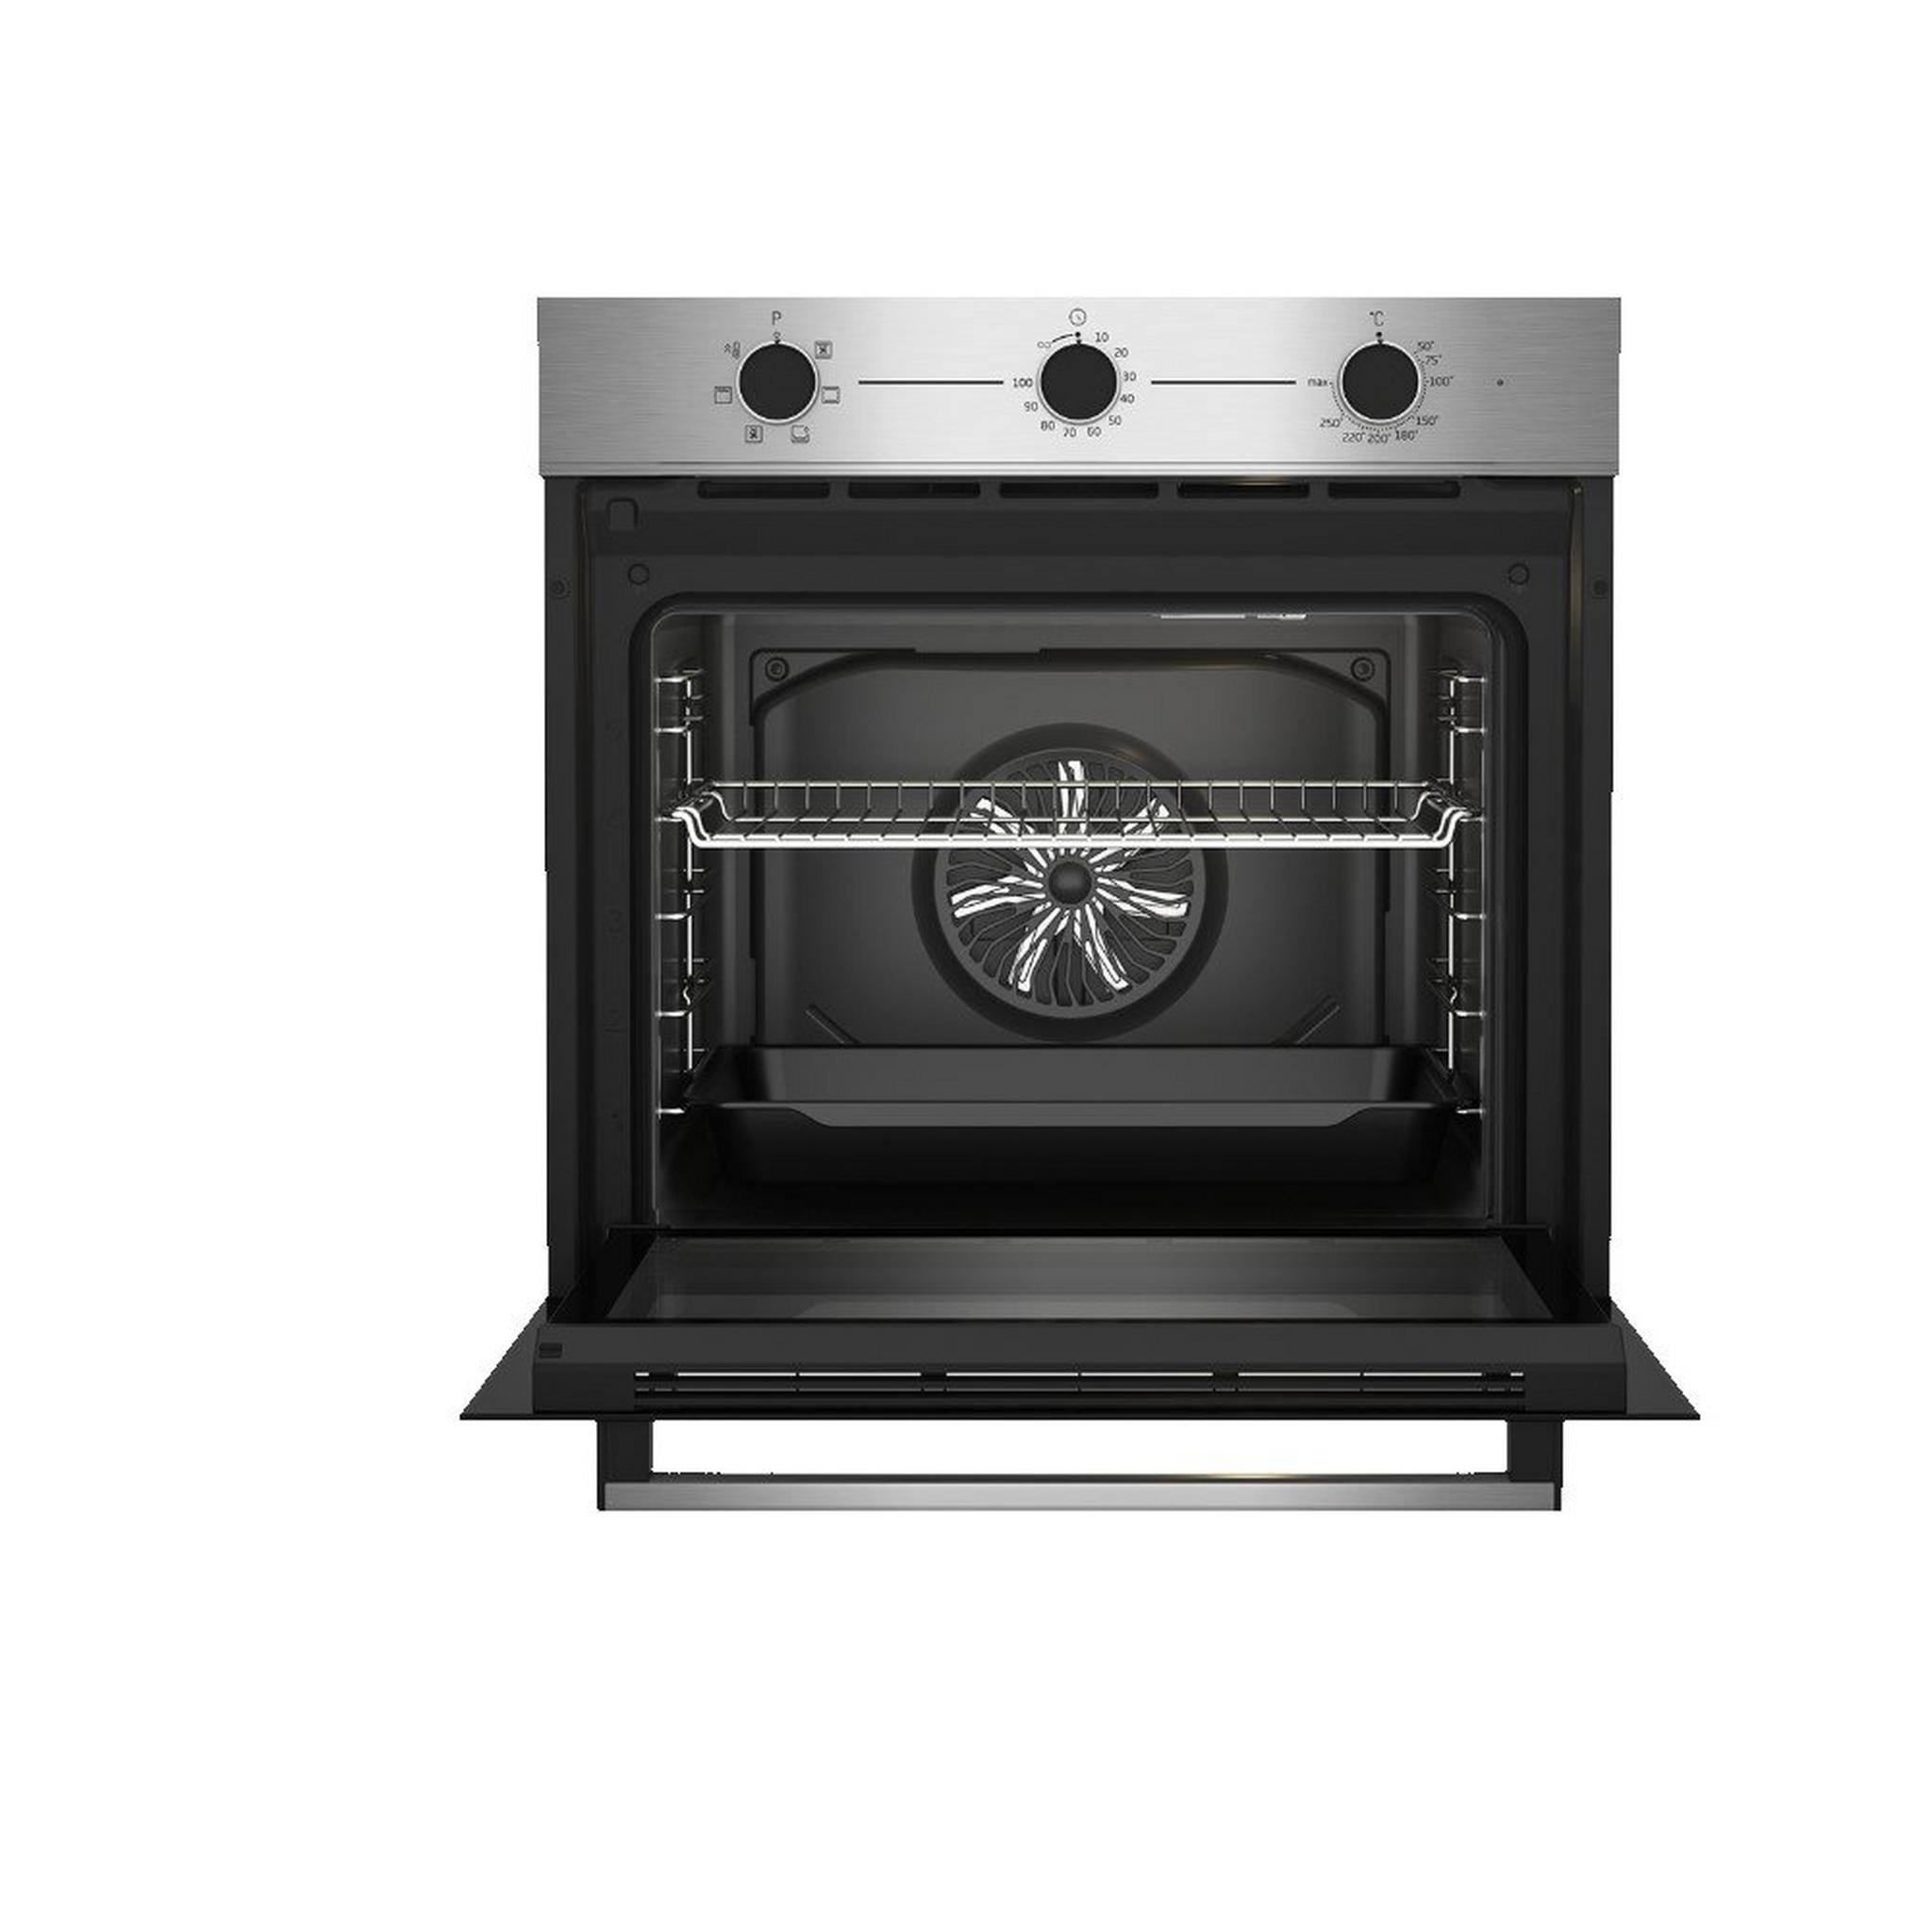 BEKO Electric Oven, 60cm, 74L, BBIE14100XC - Stainless Steel